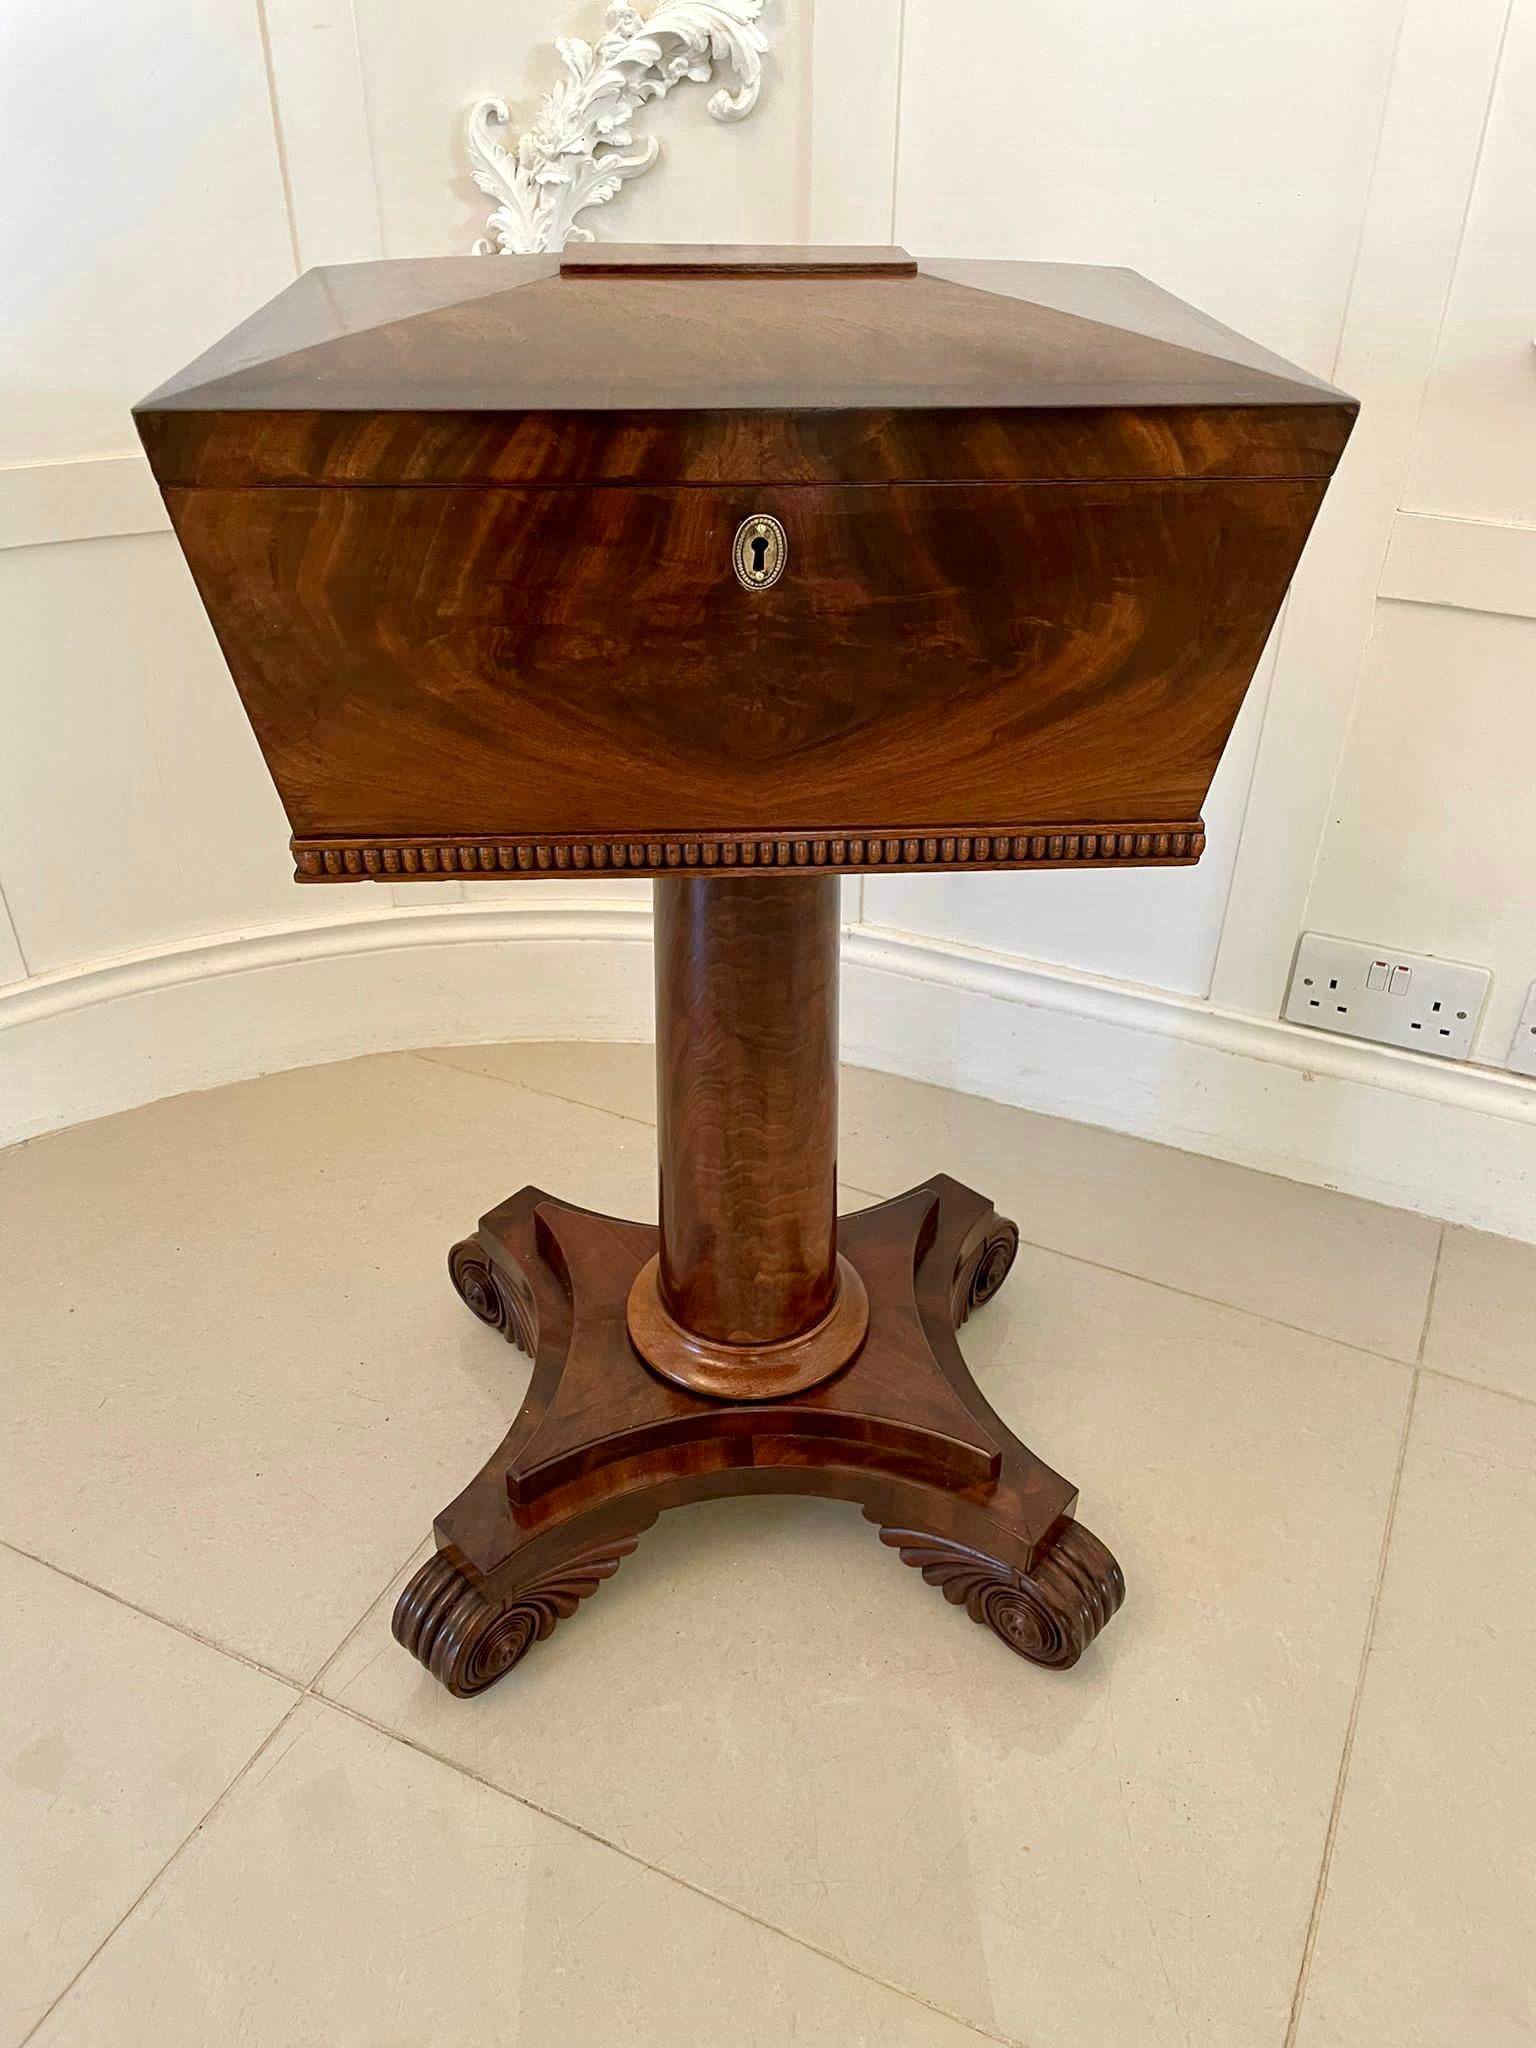 Antique William IV quality figured mahogany work box having a quality figured mahogany work box with a lift up lid opening to reveal a fitted interior consisting of five original lidded storage compartments. It is supported by a figured mahogany